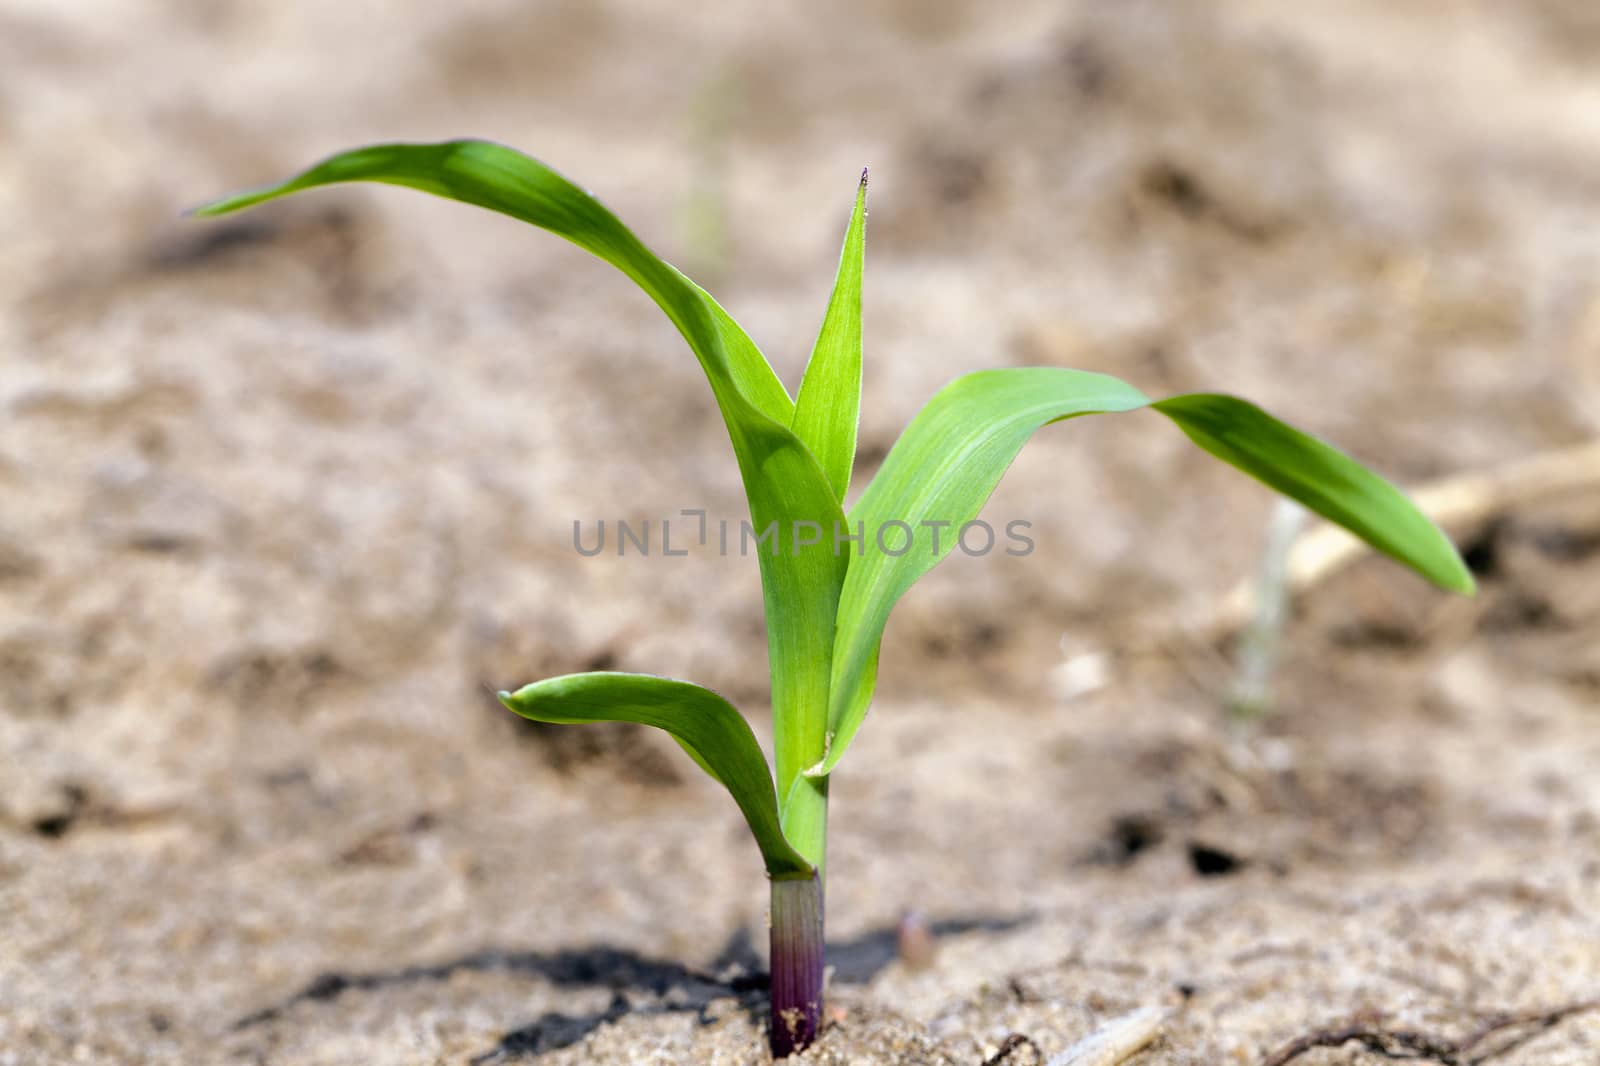   small new sprout of corn photographed close up